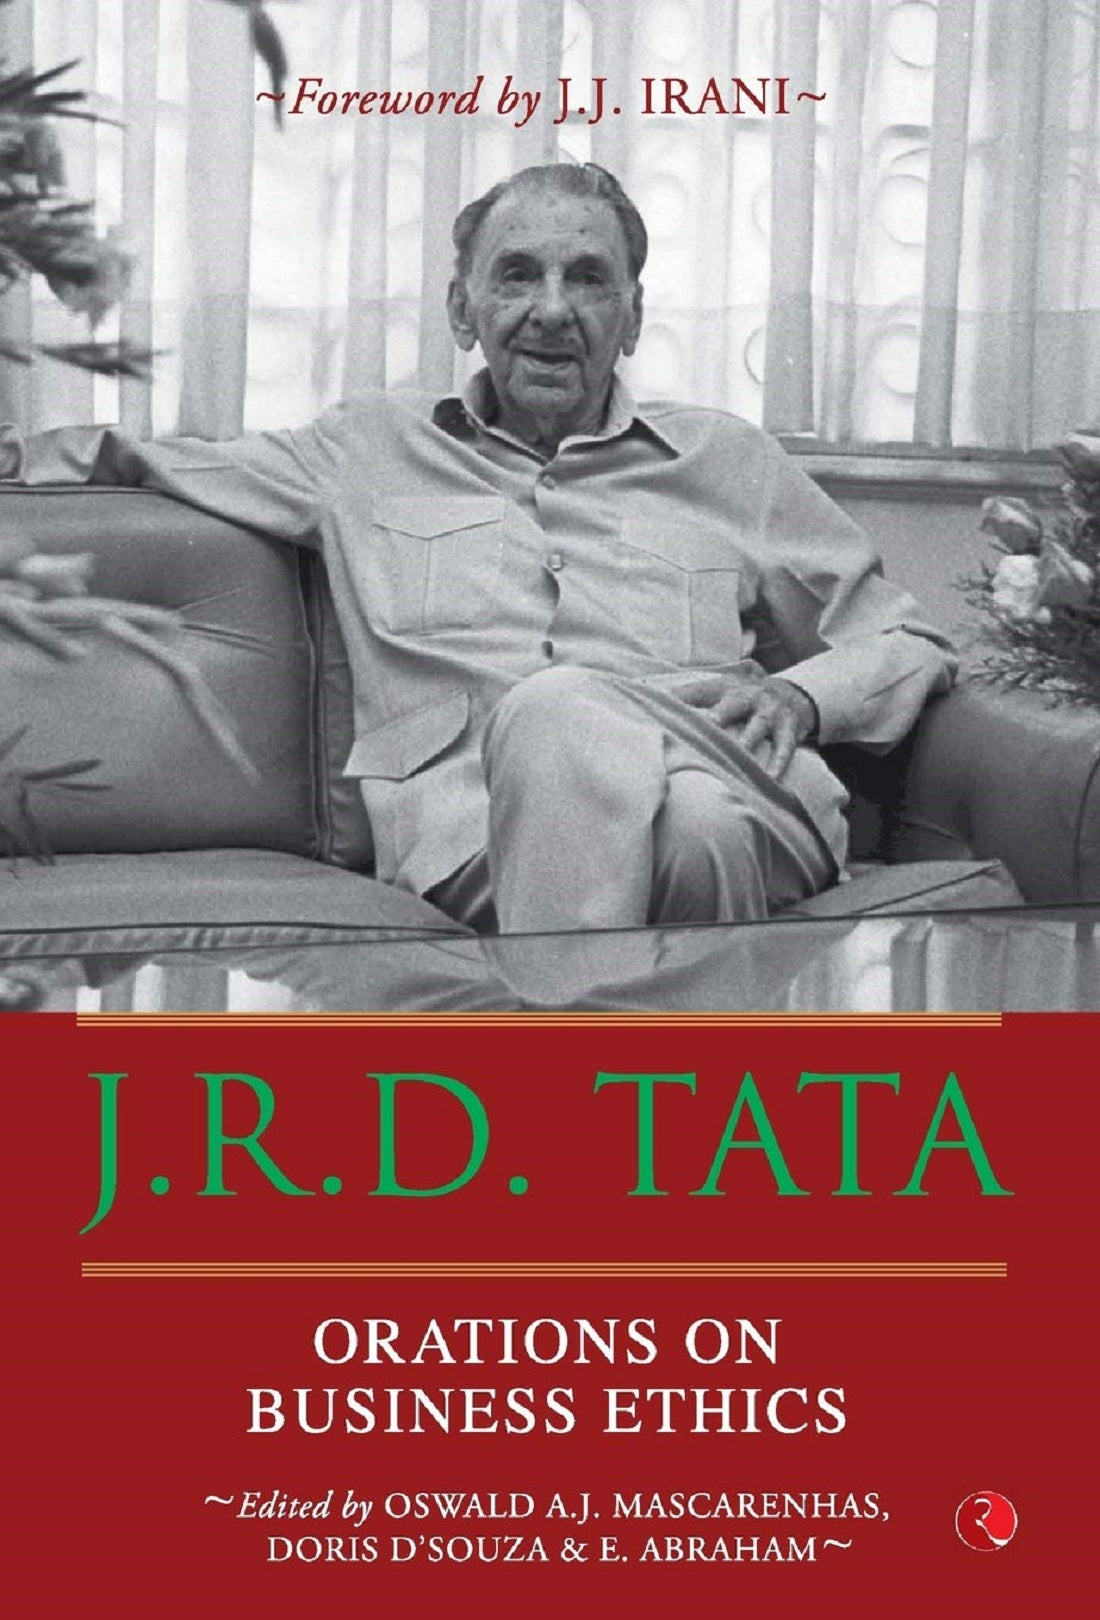 J R D TATA ORATIONS ON BUSINESS ETHICS